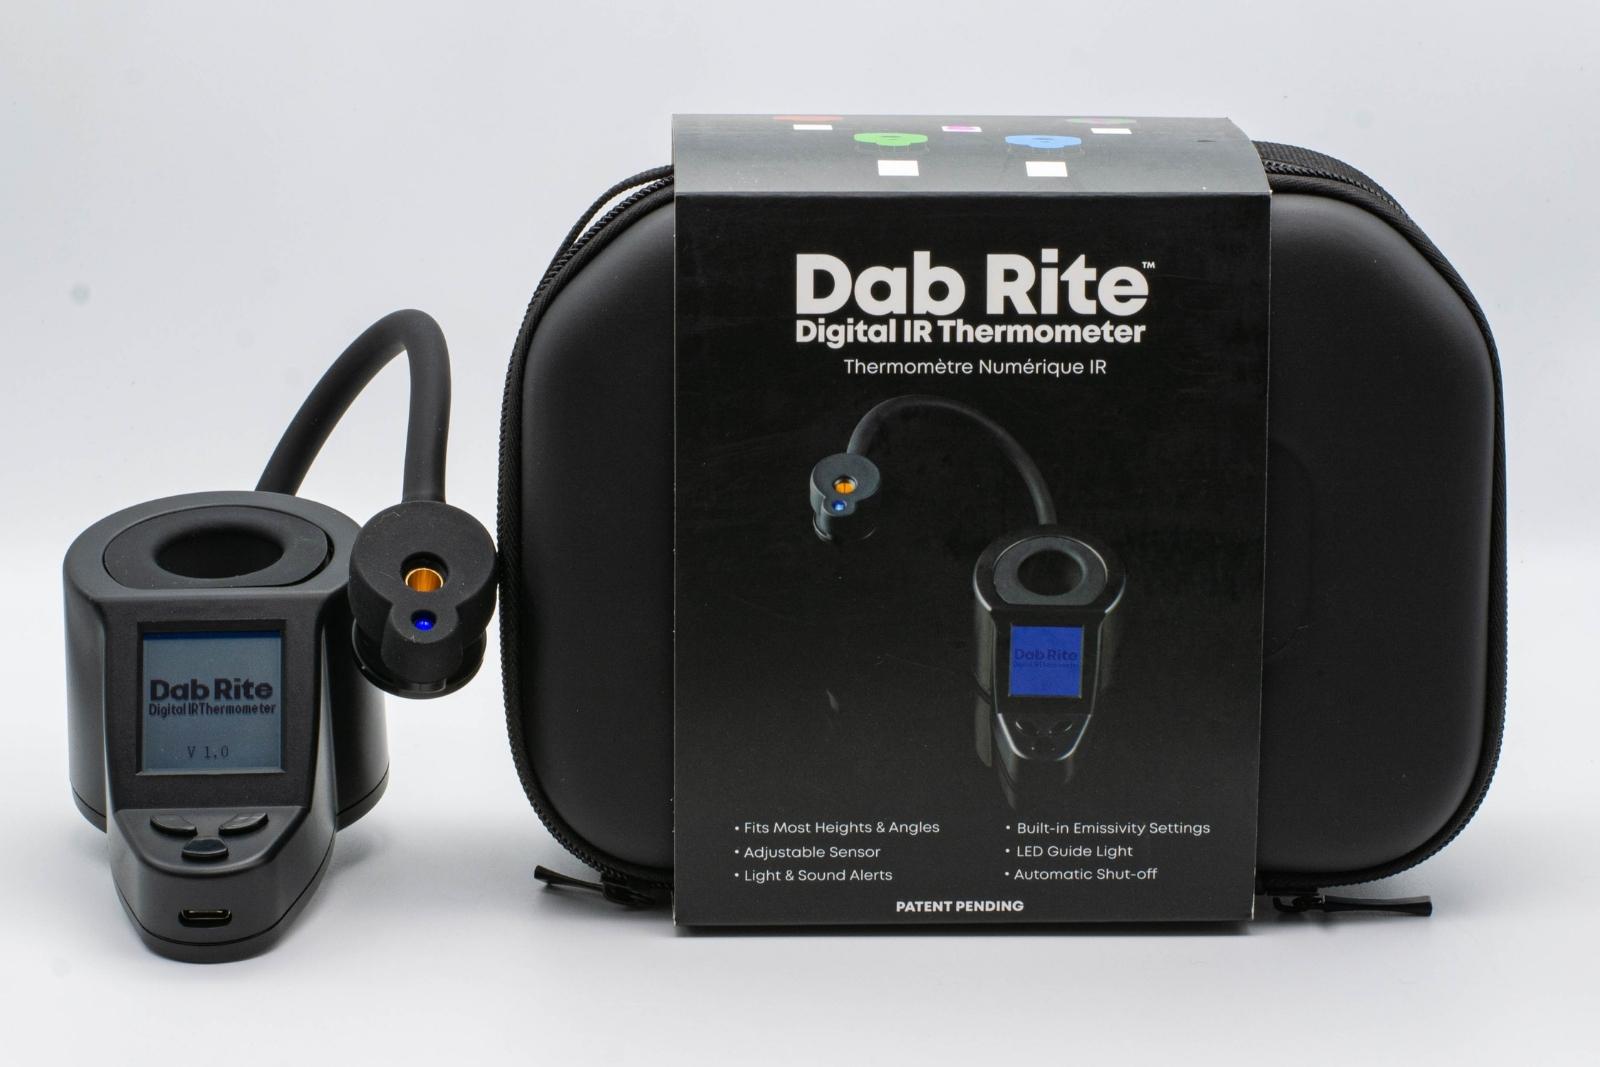 A Dab Rite Digital Infrared Thermometer, next to its case, on a white background